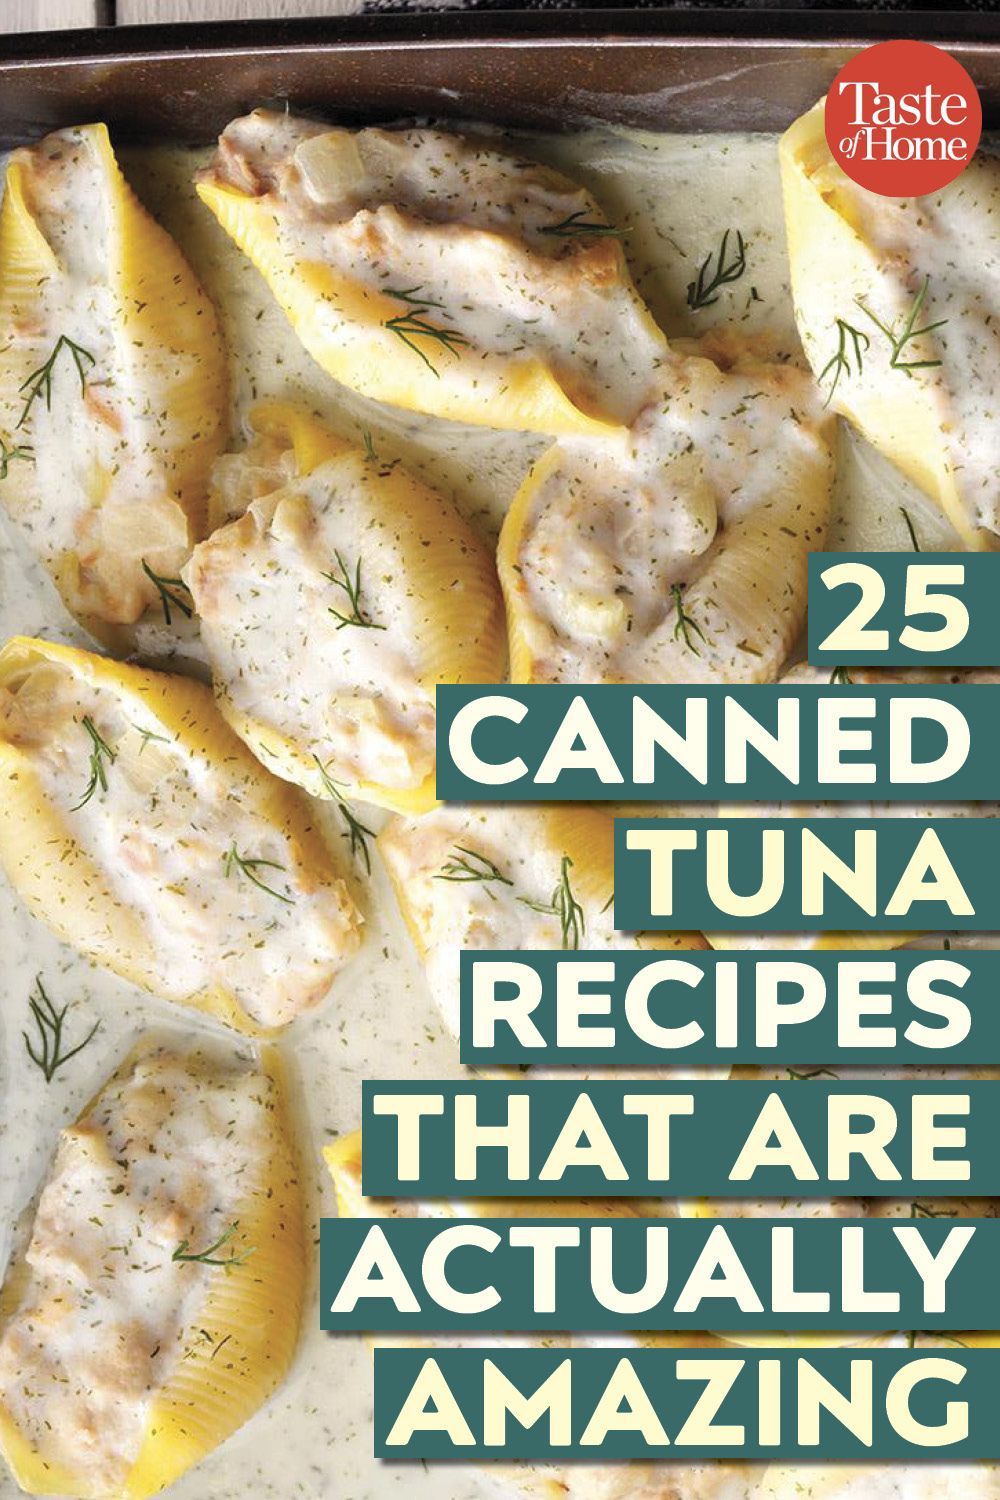 25 Canned Tuna Recipes That Are Actually Amazing -   18 healthy recipes Tuna kitchens ideas